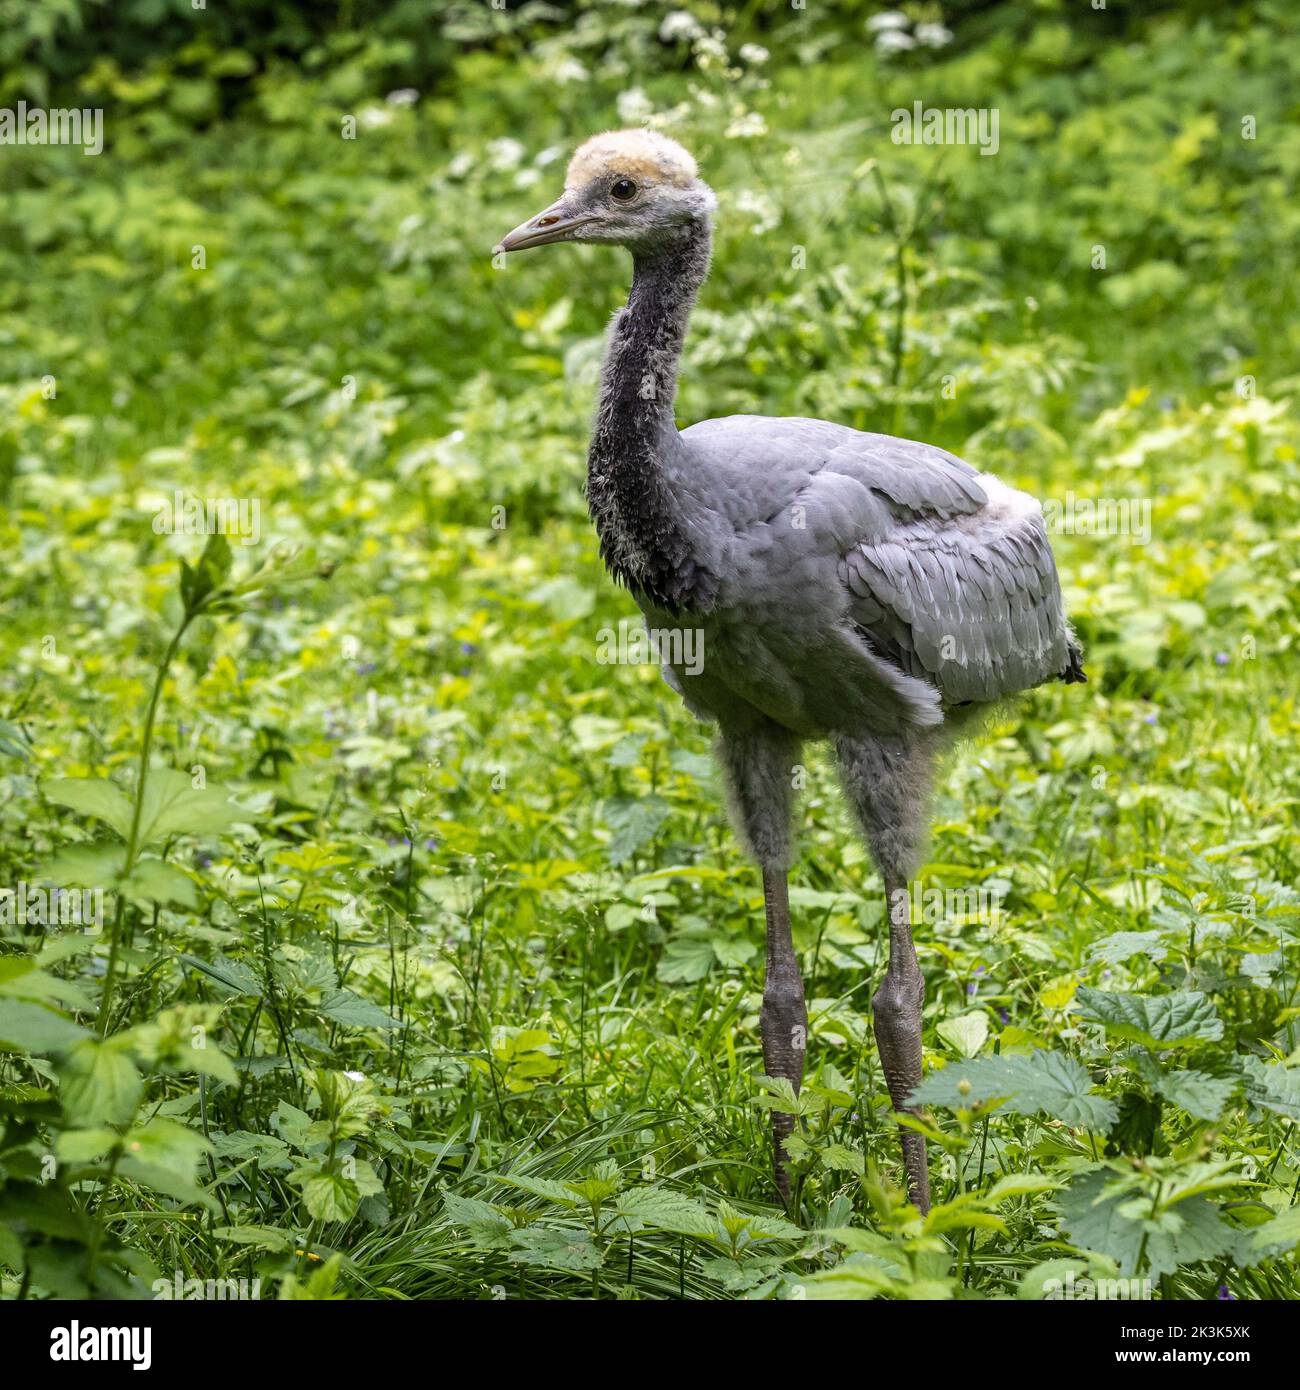 Beautiful yellow fluffy Demoiselle Crane baby gosling, Anthropoides virgo are living in the bright green meadow during the day time. It is a species o Stock Photo